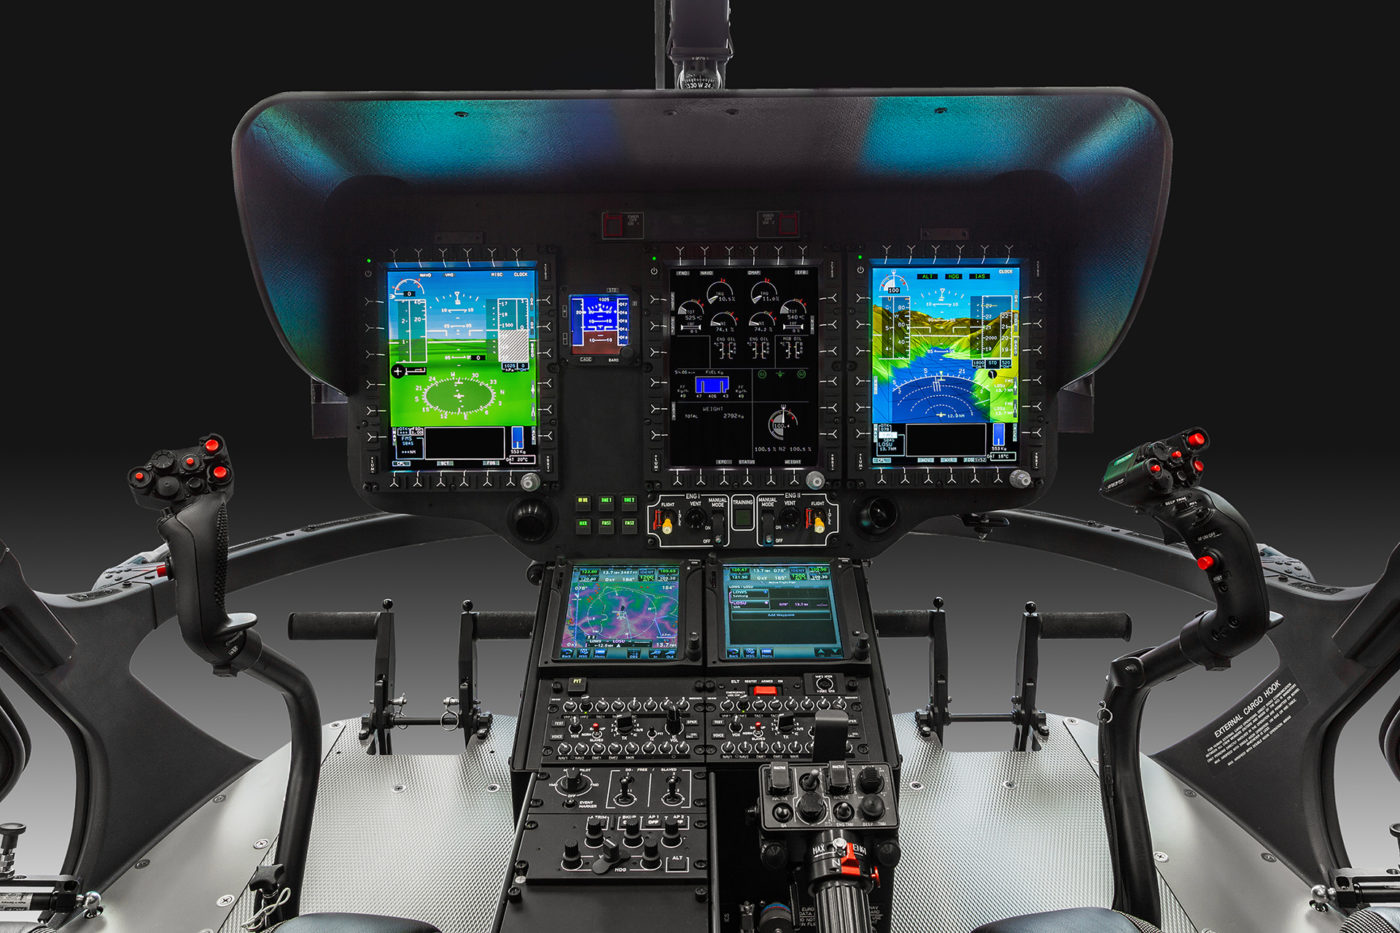 Helionix Step 3 improves the situational awareness of pilots and flight crews, thanks to the new Synthetic Vision System which identifies obstacles.